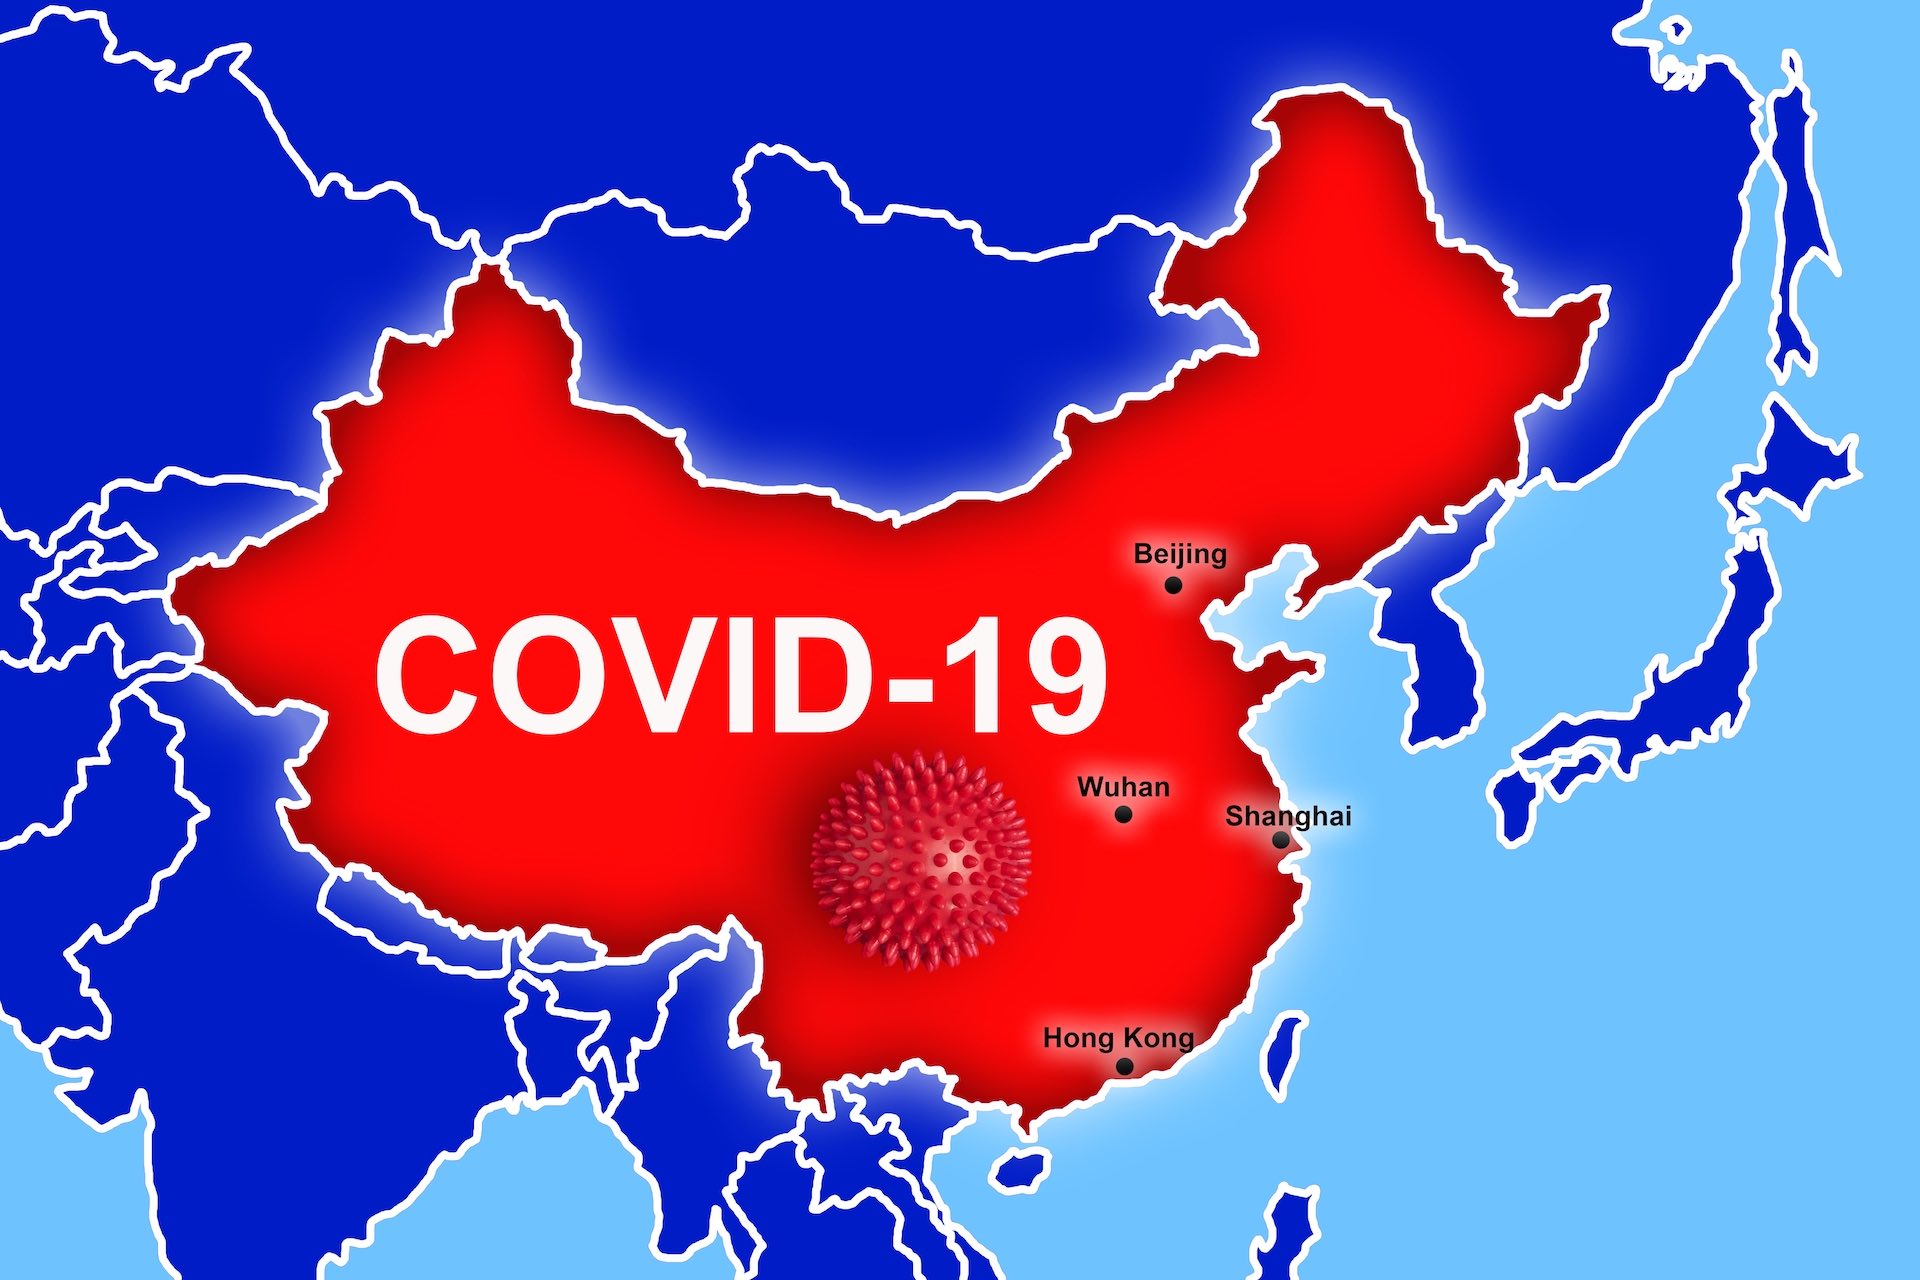 Millions in lockdown in China as COVID-19 outbreak reaches two-year high